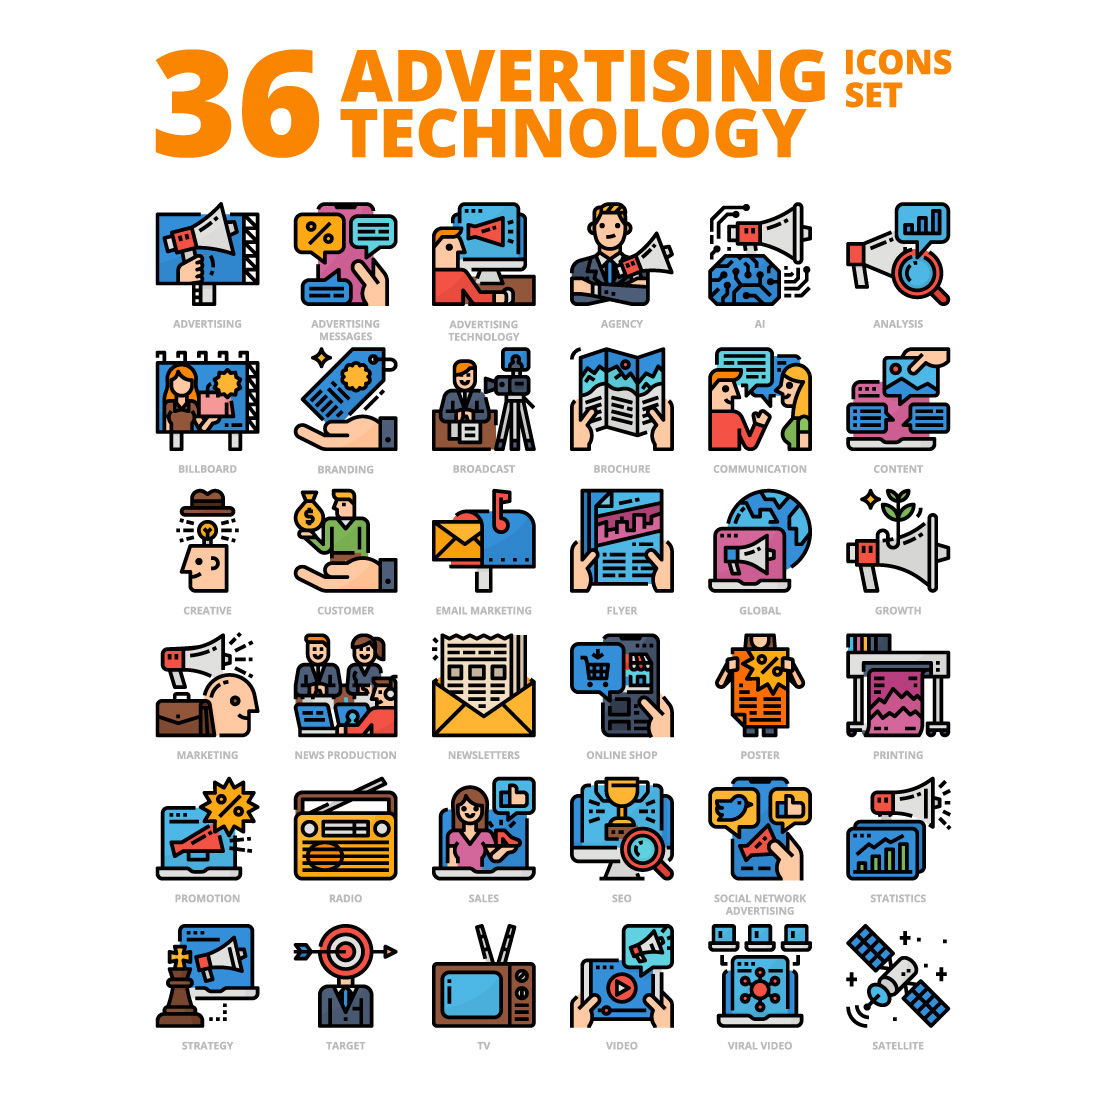 36 Advertising Technology Icons Set x 4 Styles cover image.